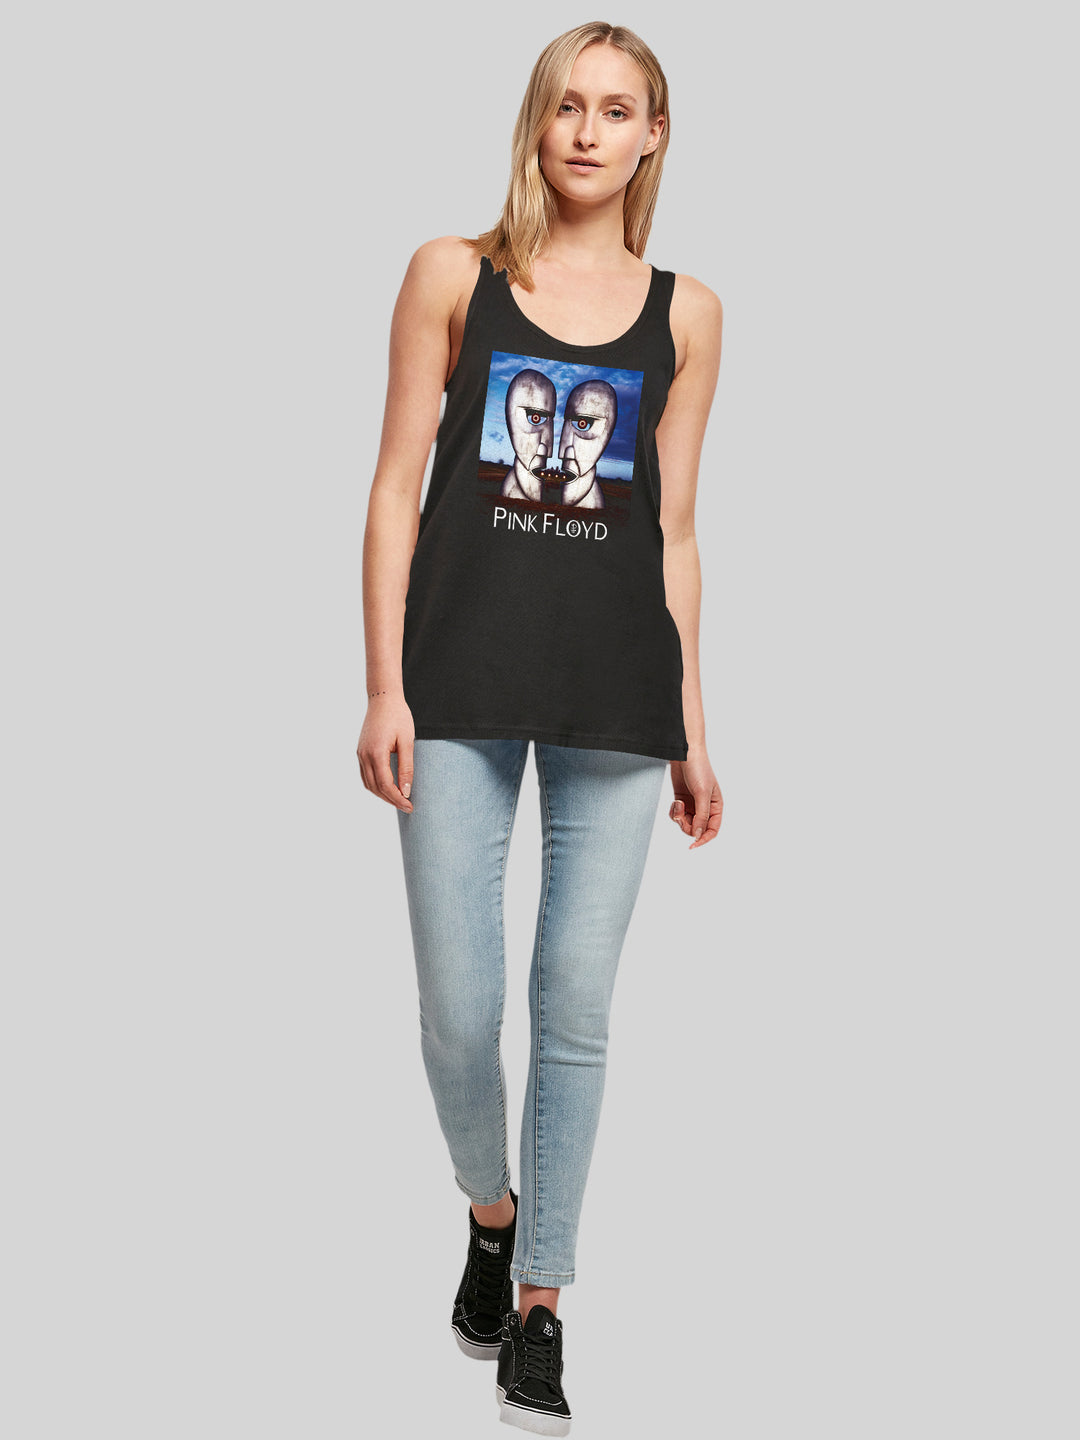 Pink Floyd The Division Bell with Ladies Tanktop